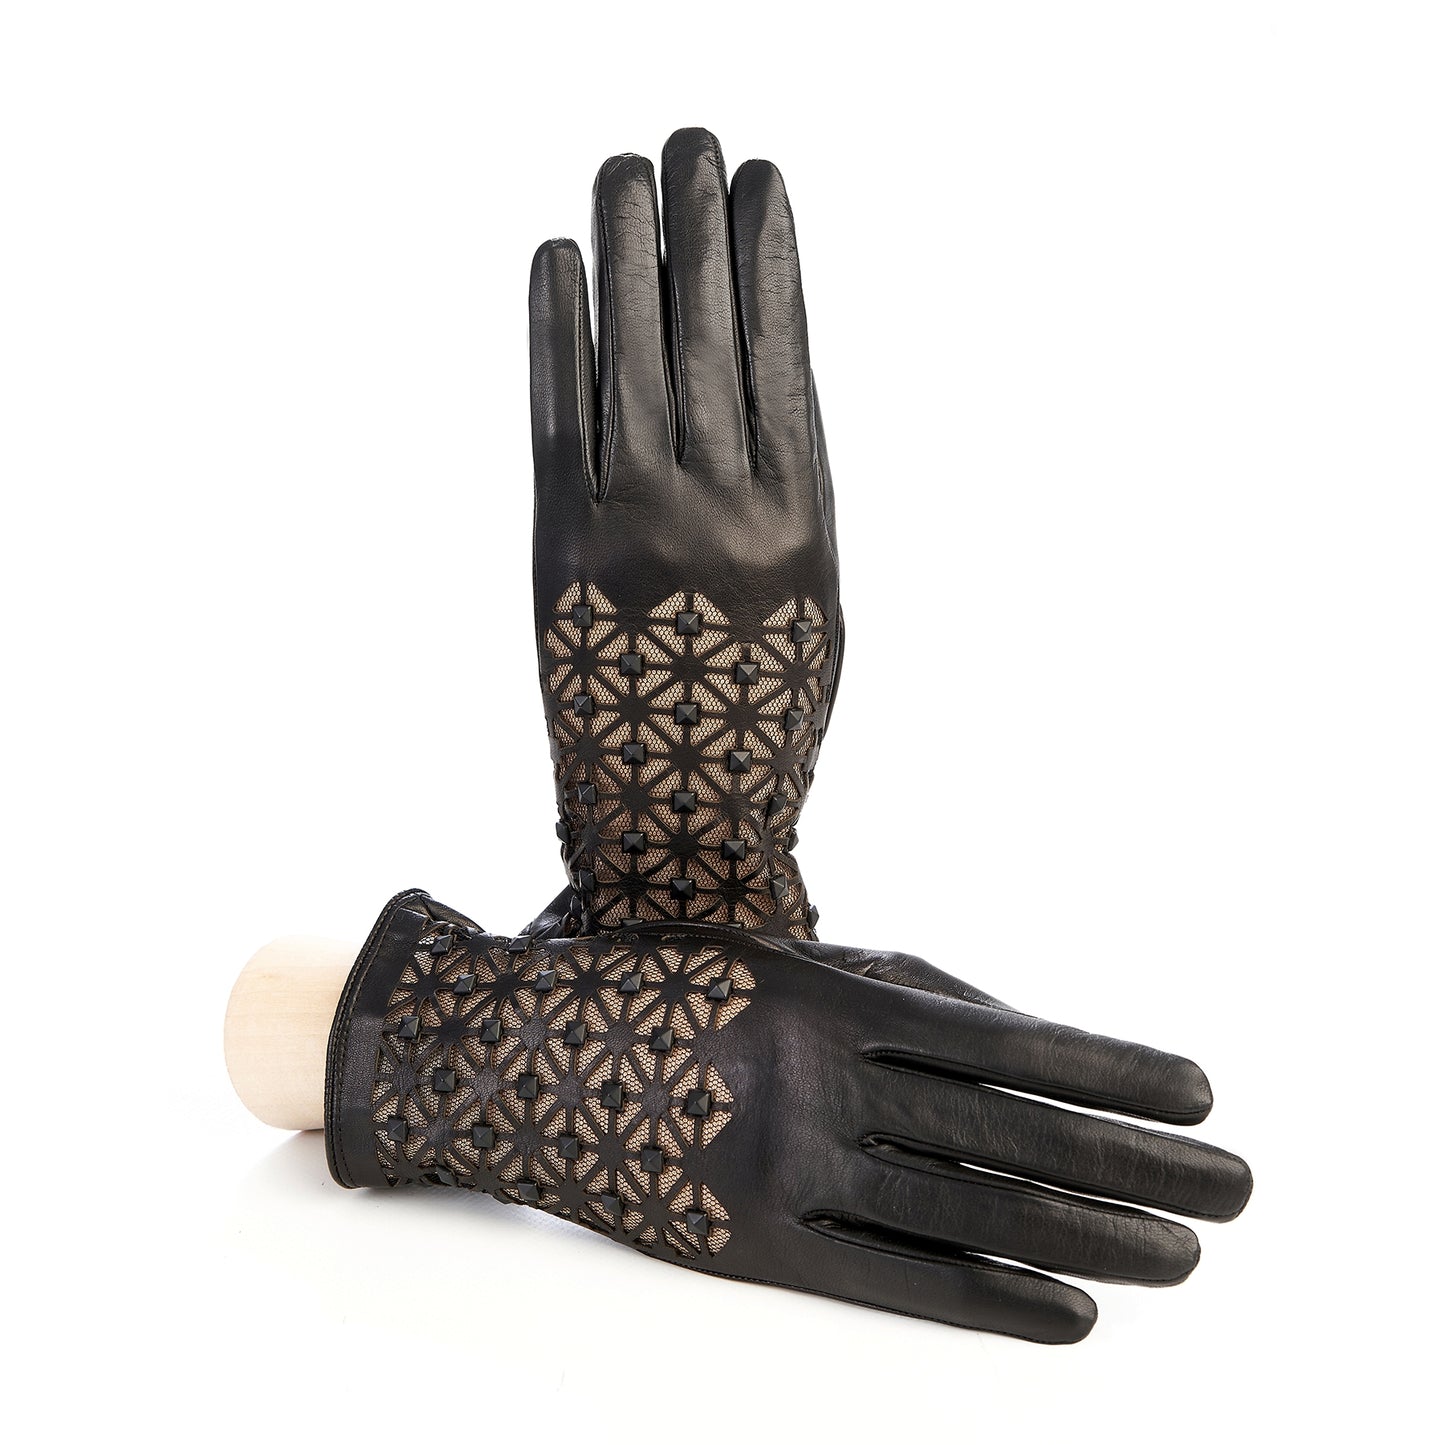 Women's black leather gloves with studs silk lined